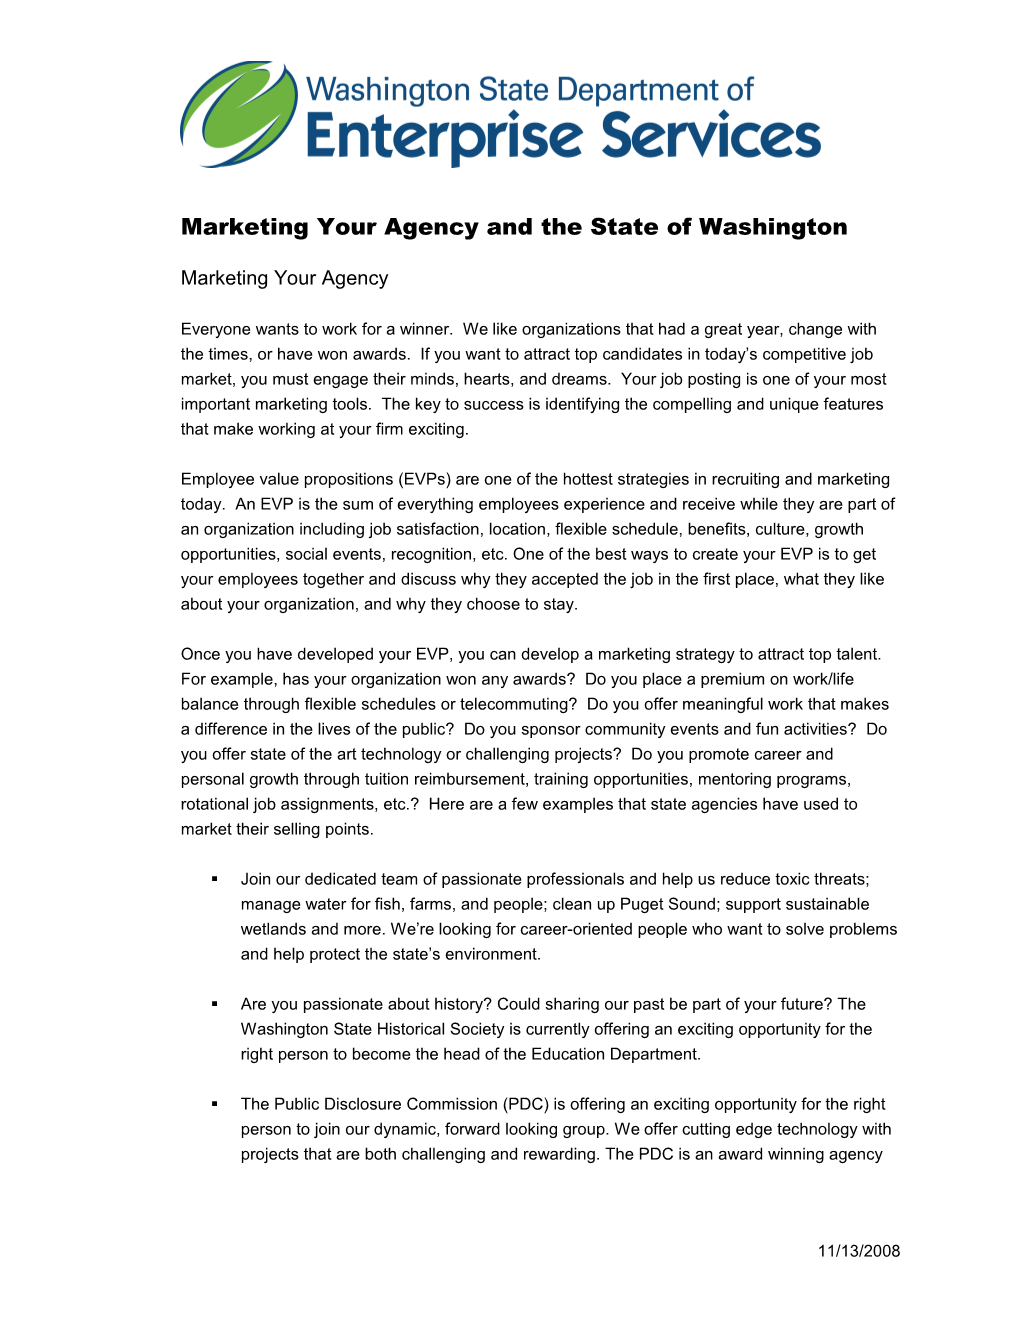 Marketing Your Agency and State of WA